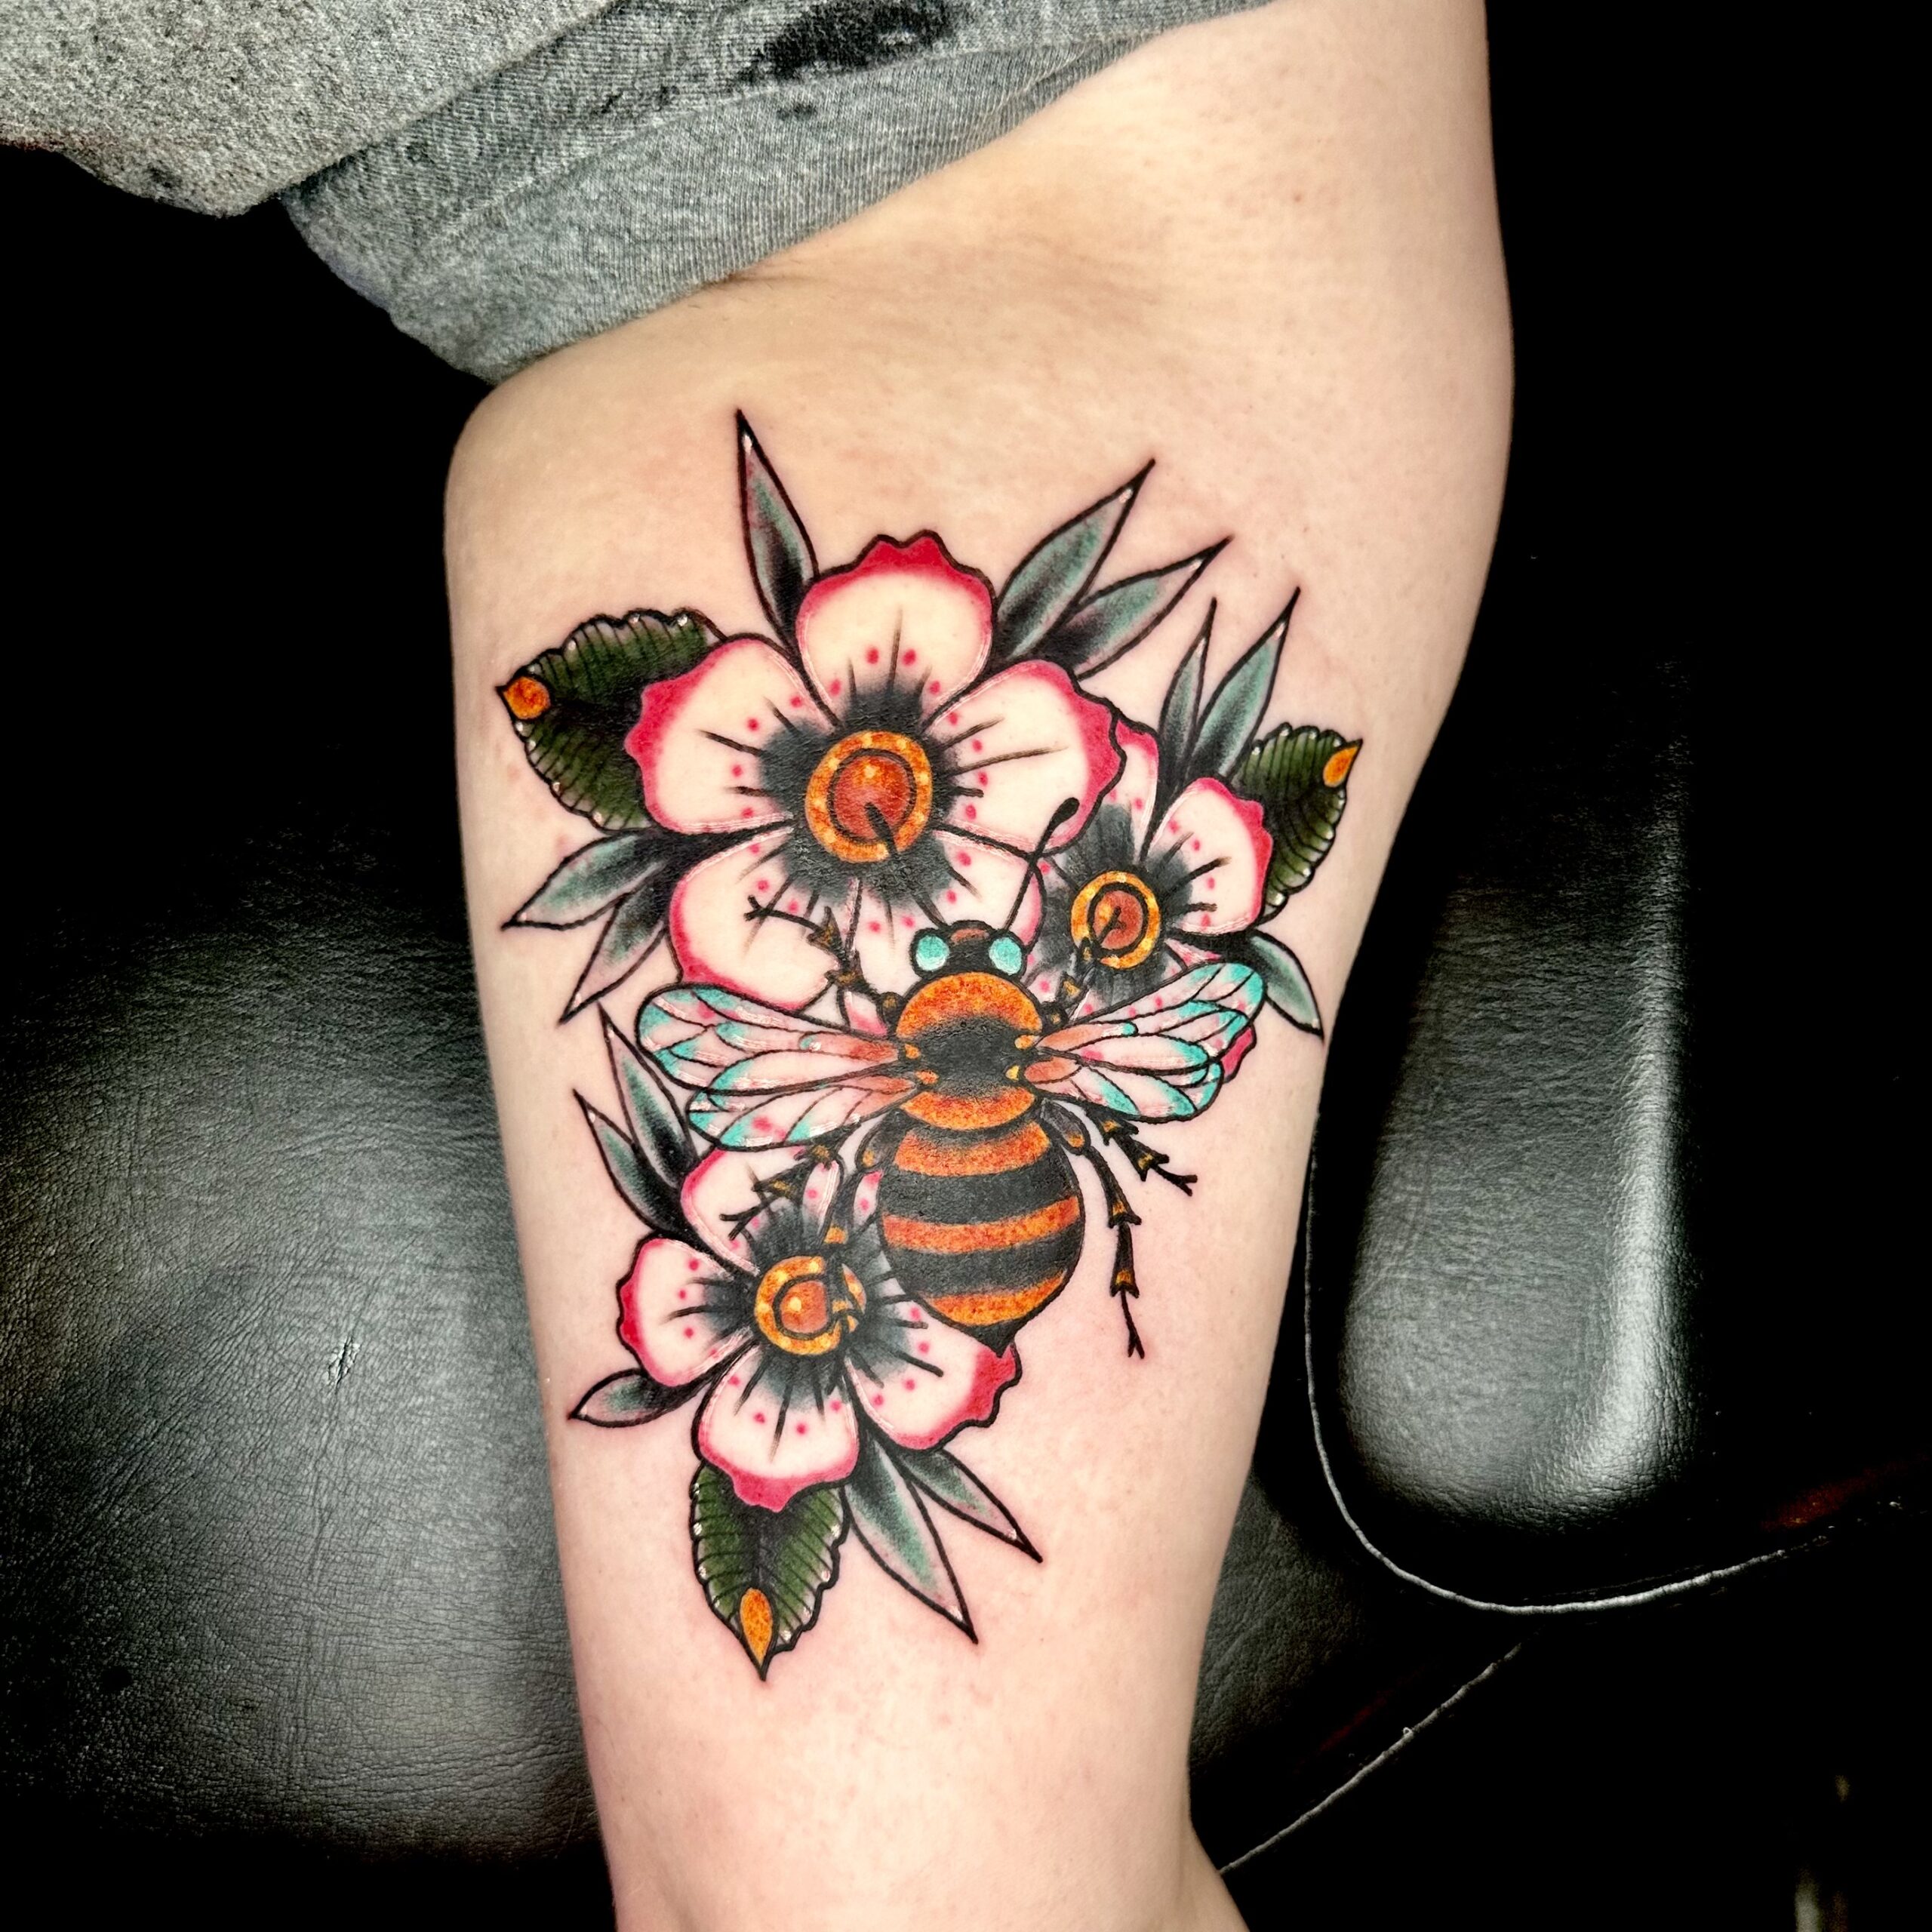 Tattoo of flowers and a bee from Dallas tattoo shop